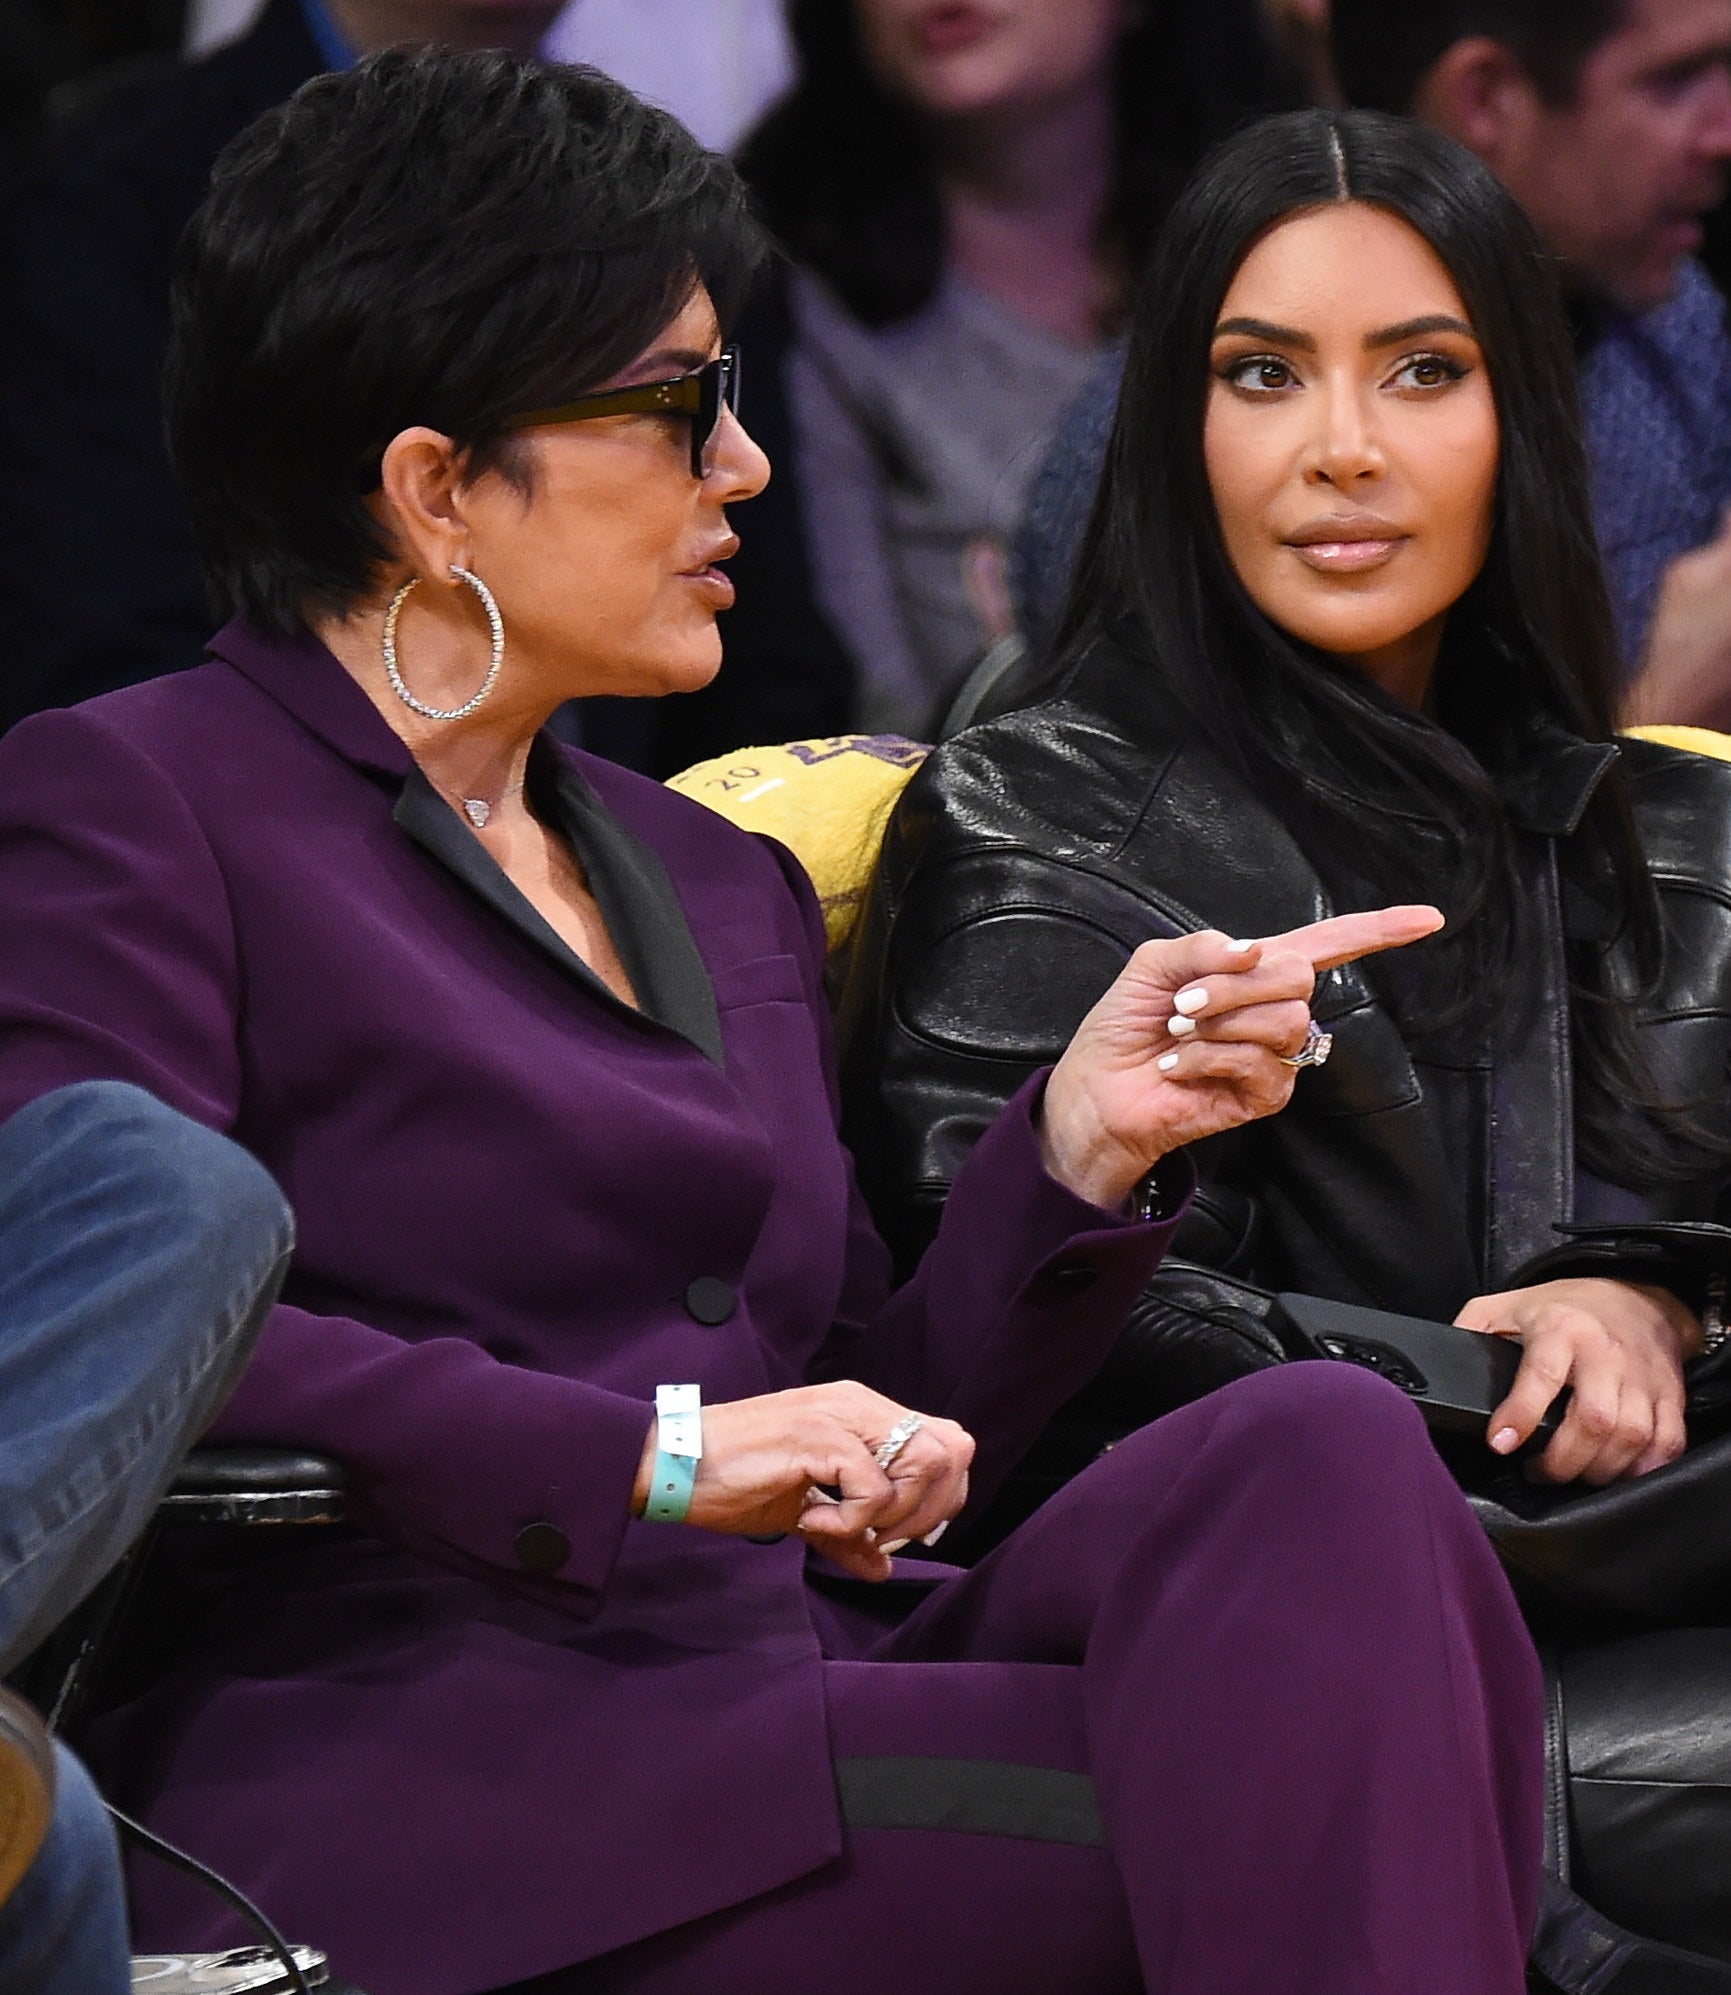 kim and kris courtside at a game